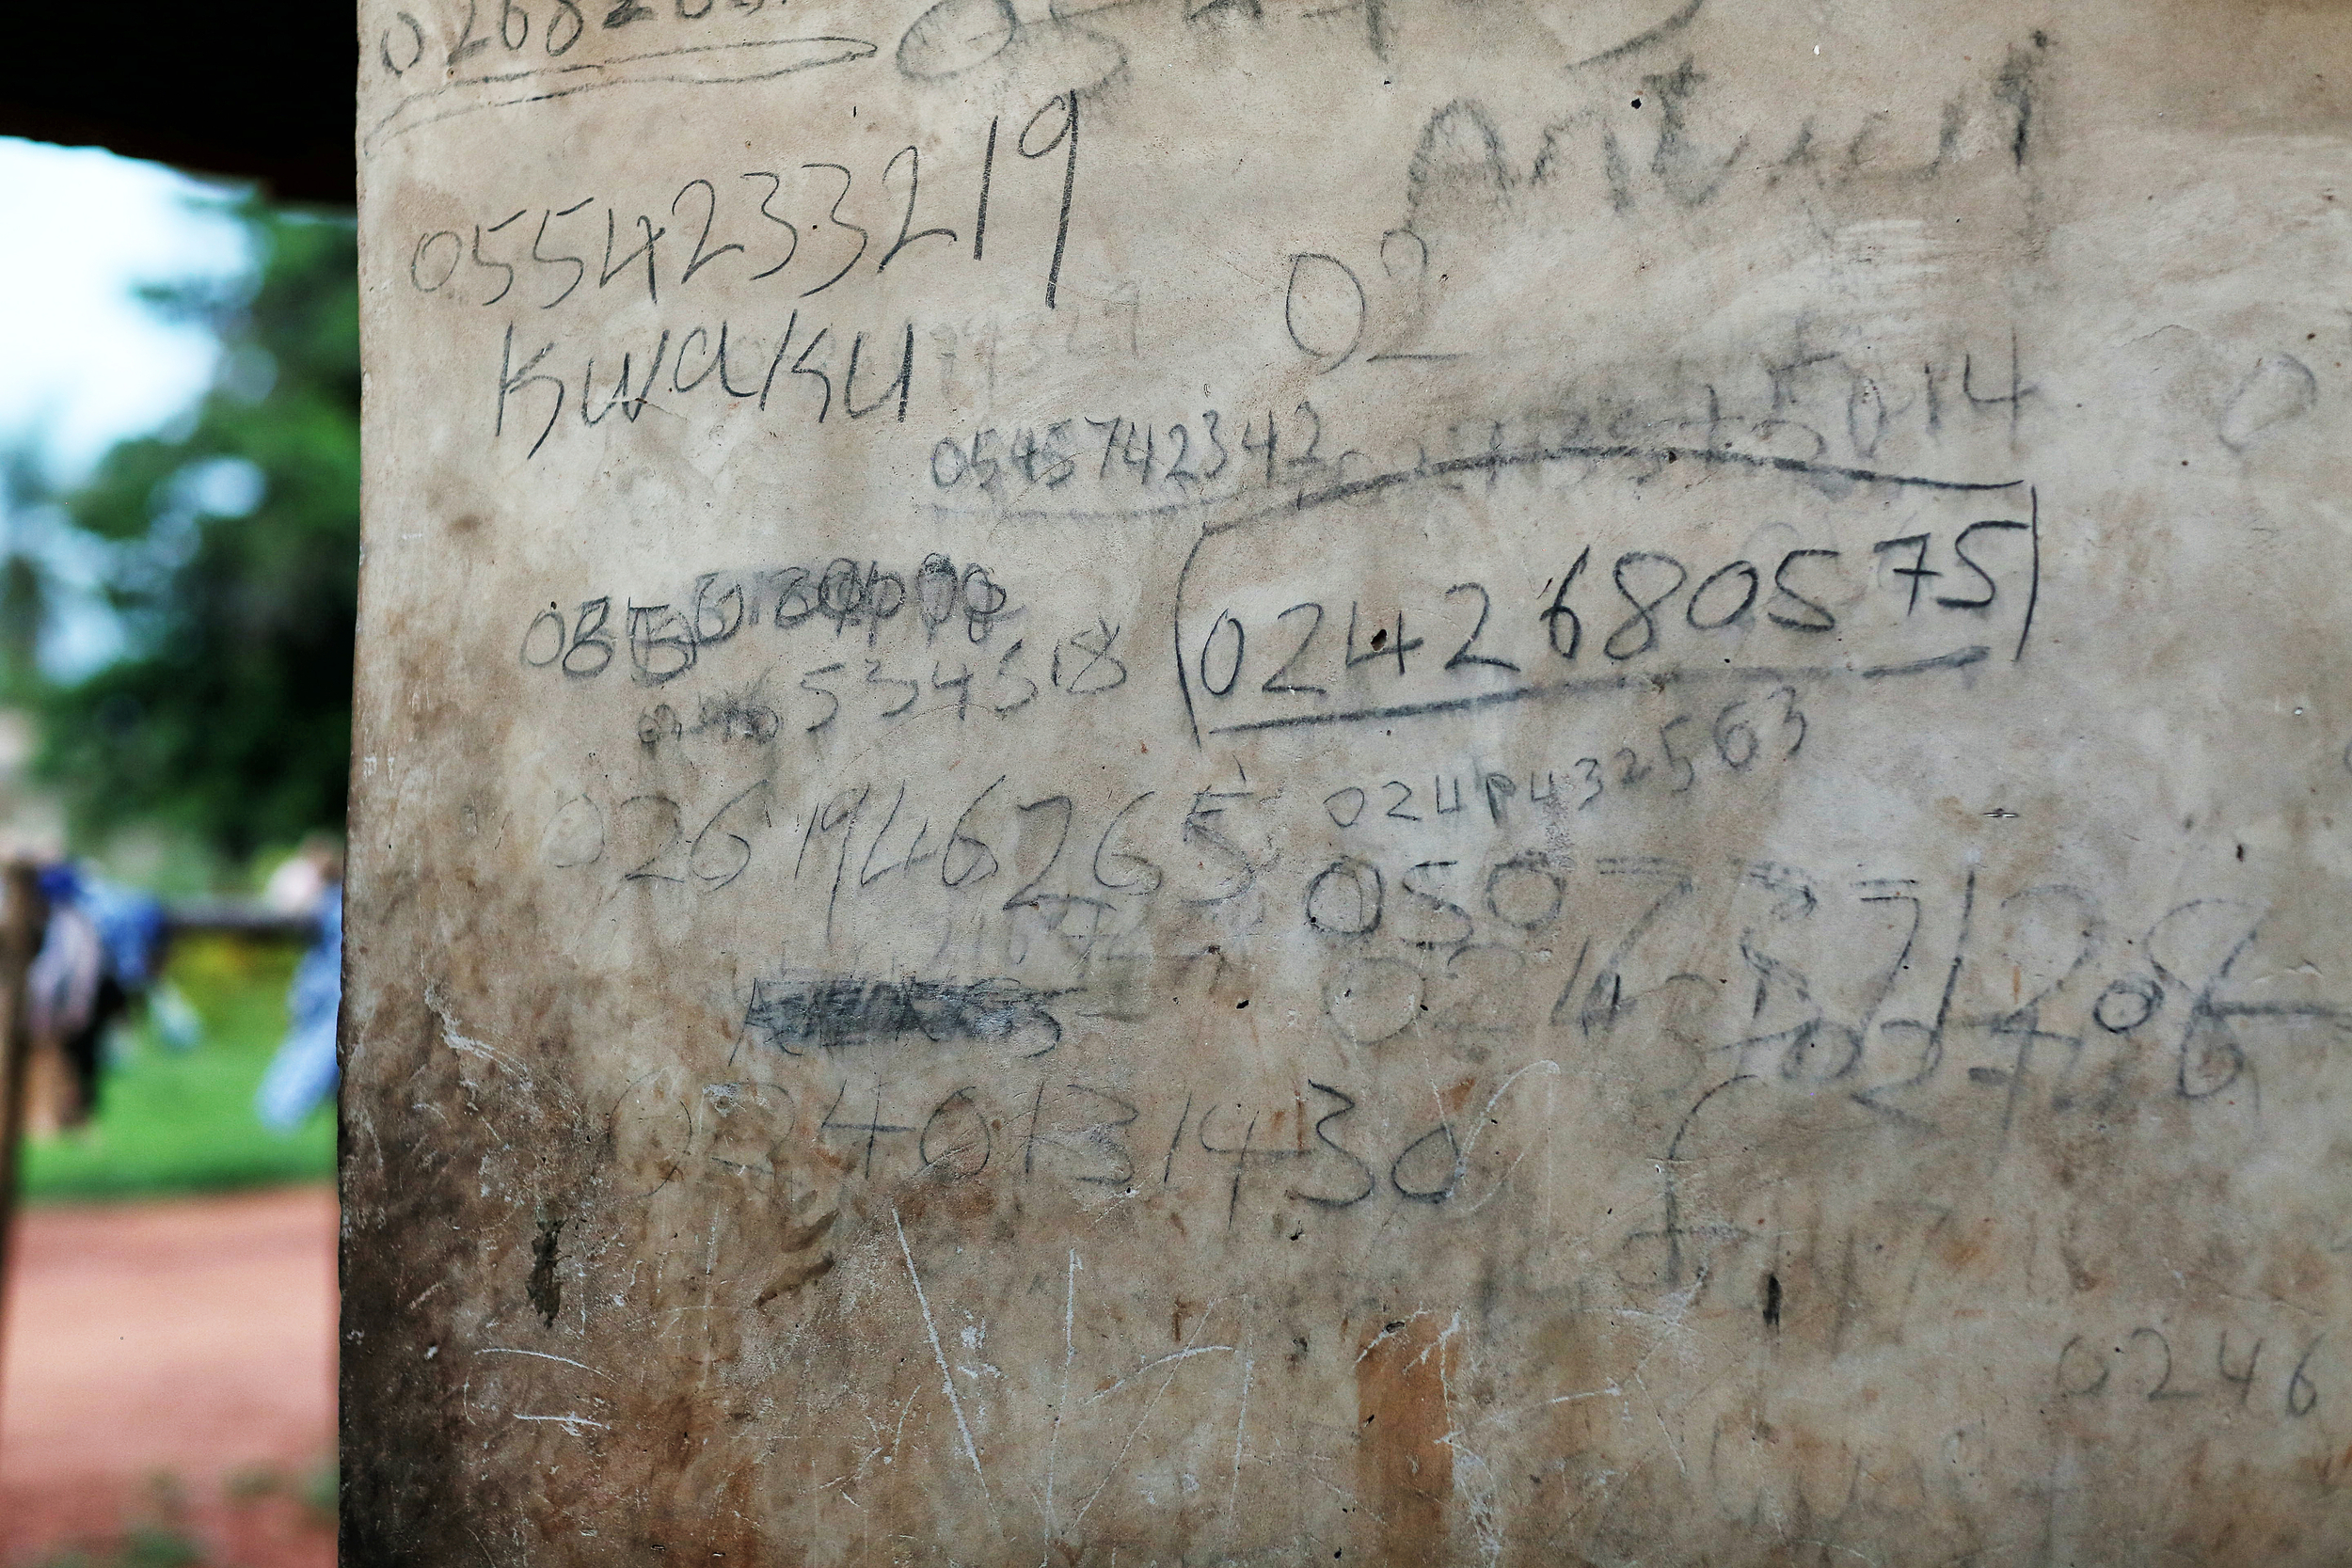  A series of phone numbers on a wall in Patience's family home.&nbsp; 